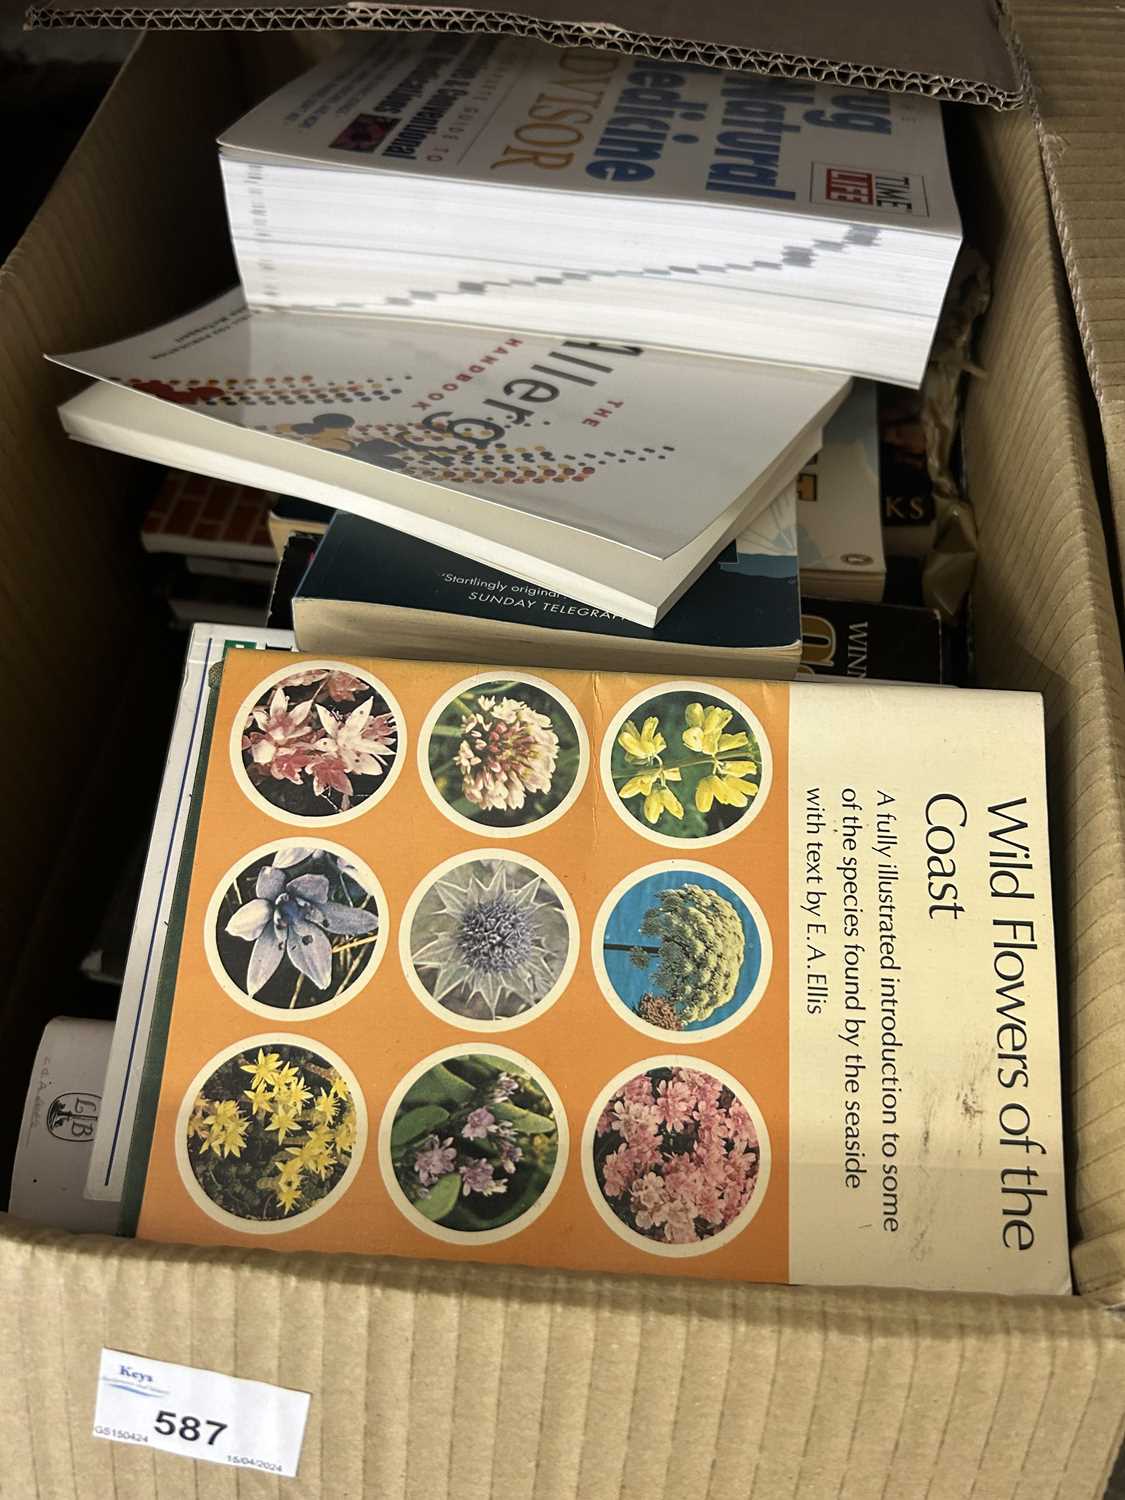 Books to include medicine, natural history and others